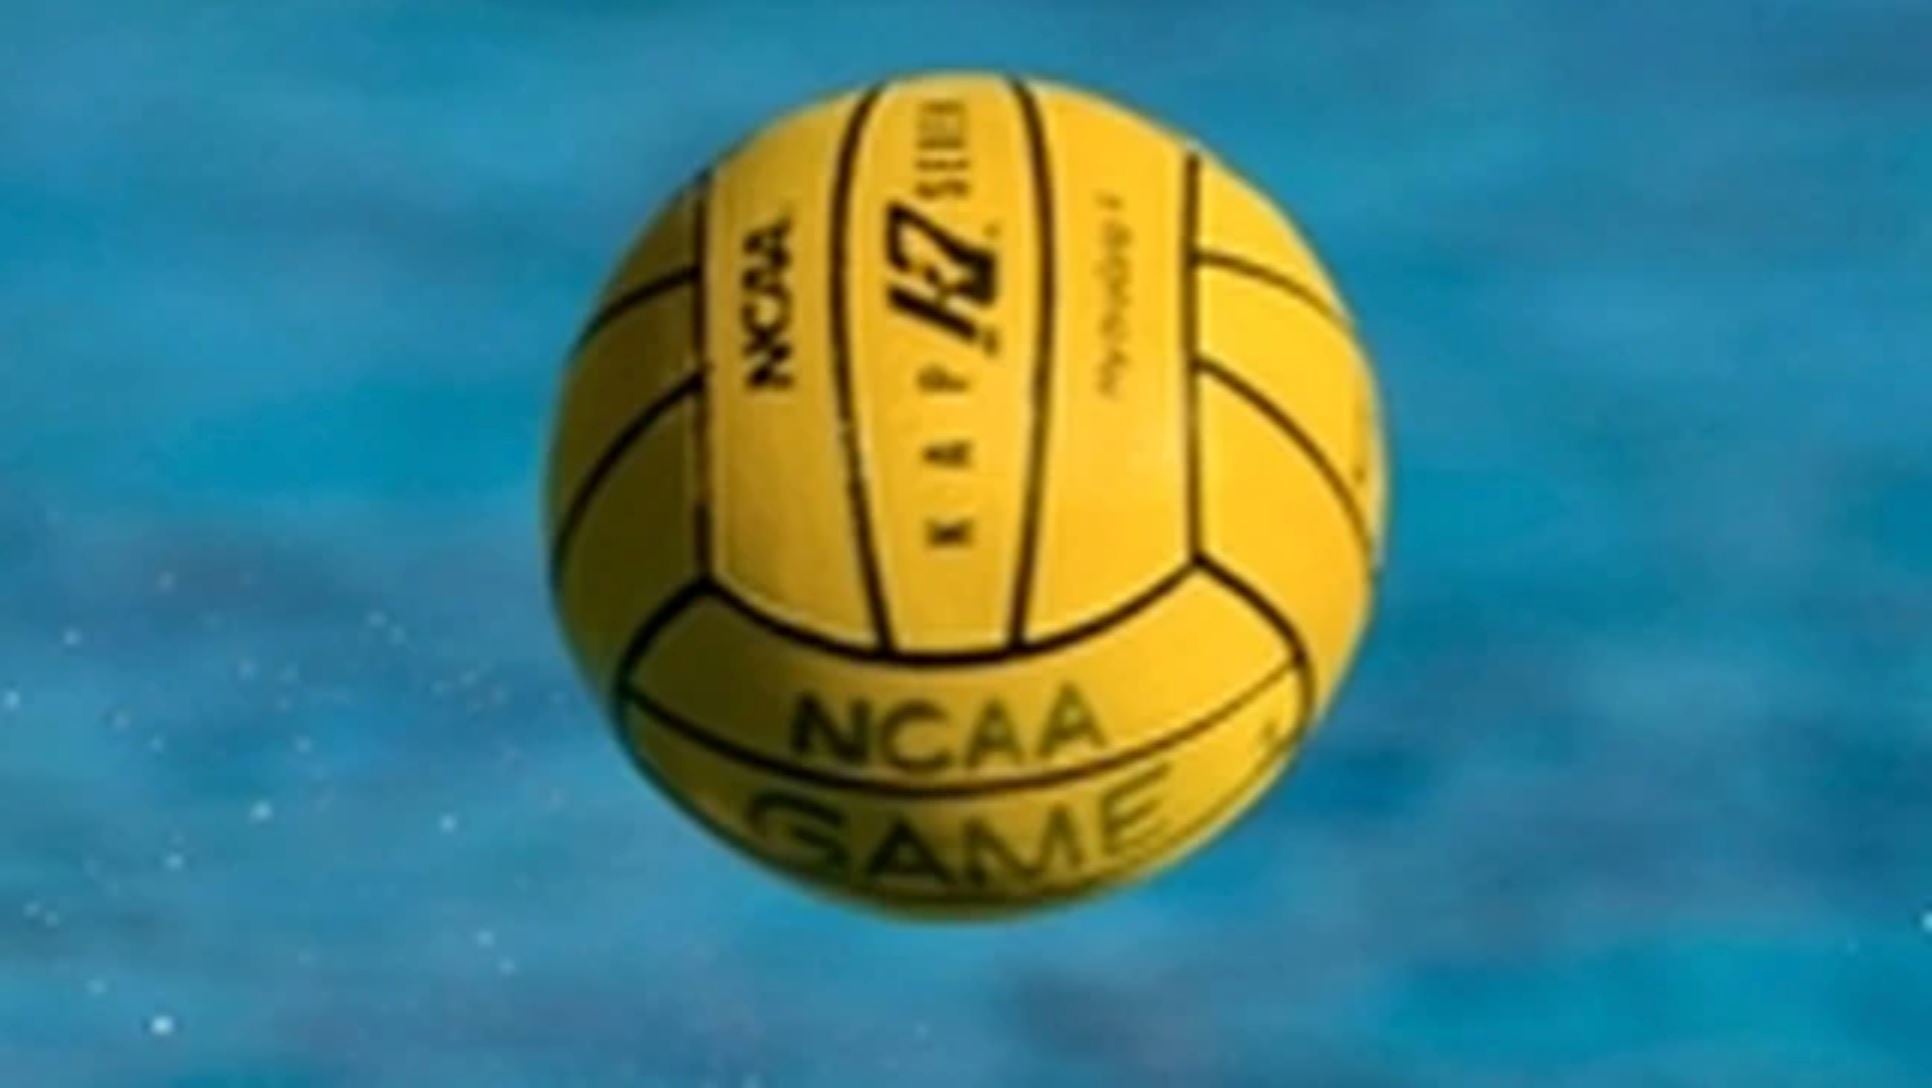 KAP7 extends partnership with NCAA as official championship game ball.